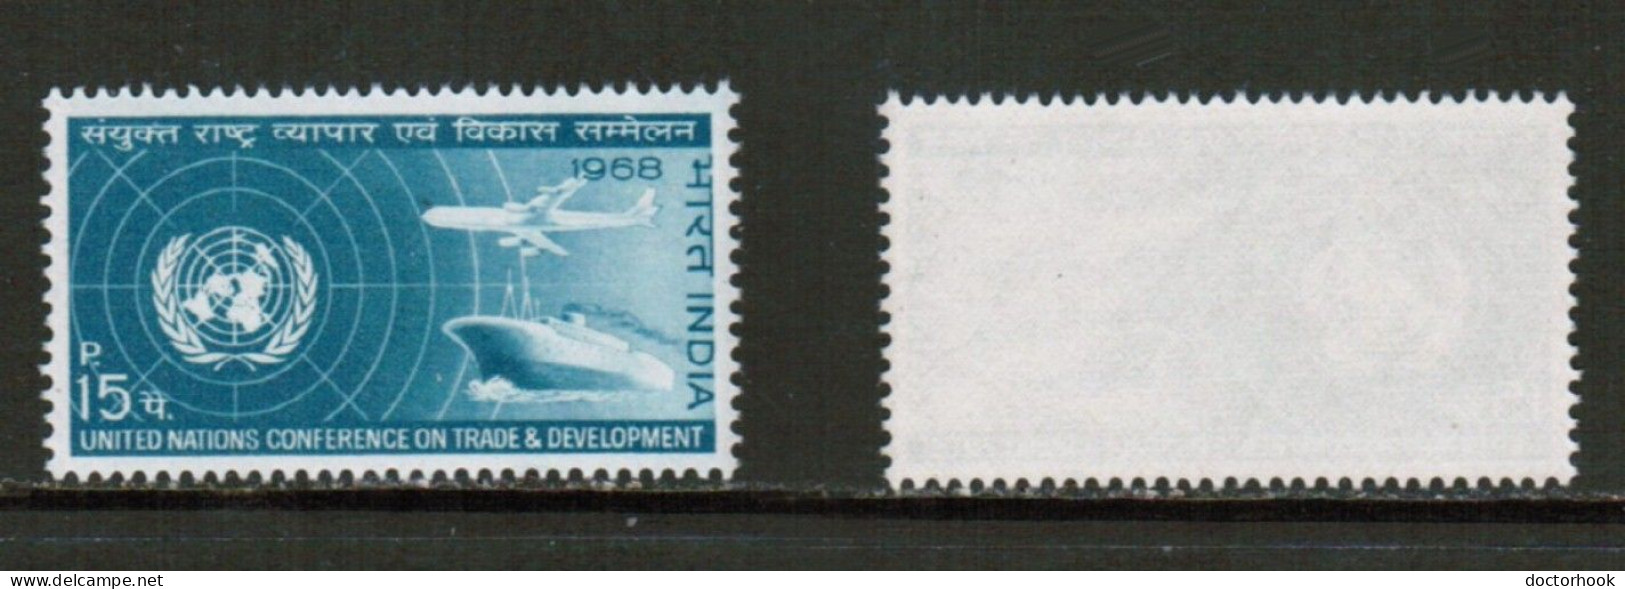 INDIA   Scott # 463** MINT NH (CONDITION AS PER SCAN) (Stamp Scan # 919-9) - Neufs